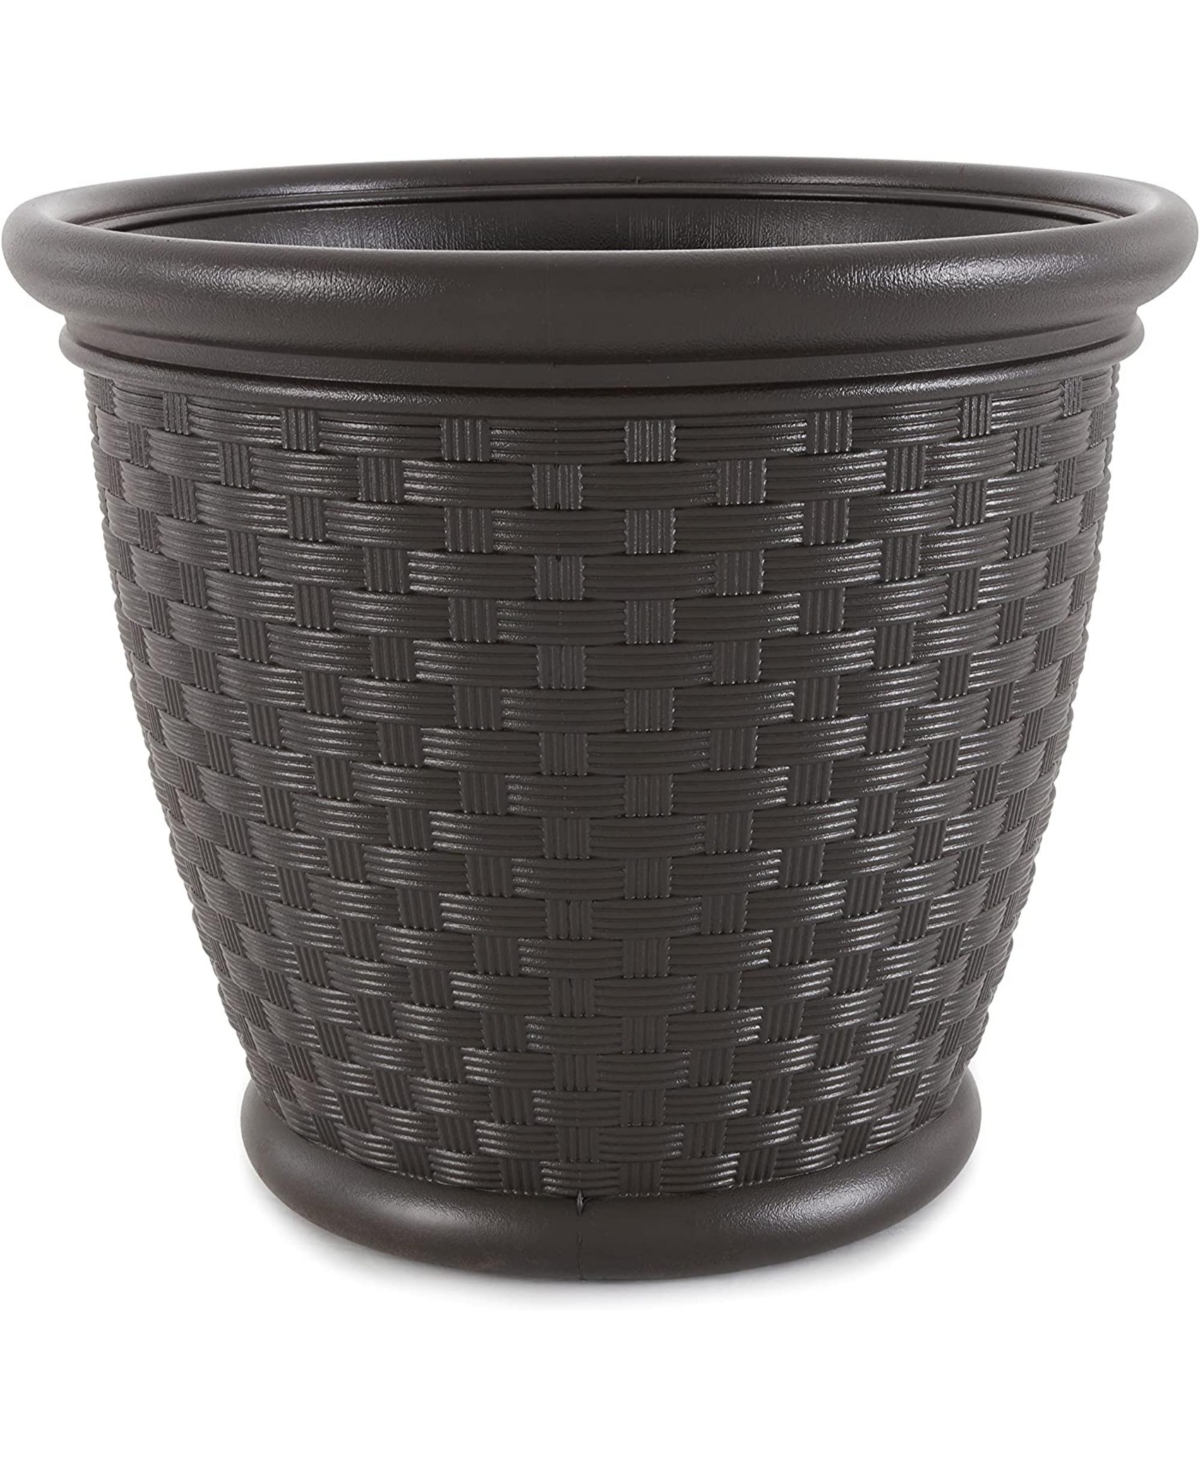 Sonora Resin Wicker Planter for Indoor & Outdoor Use - Brown